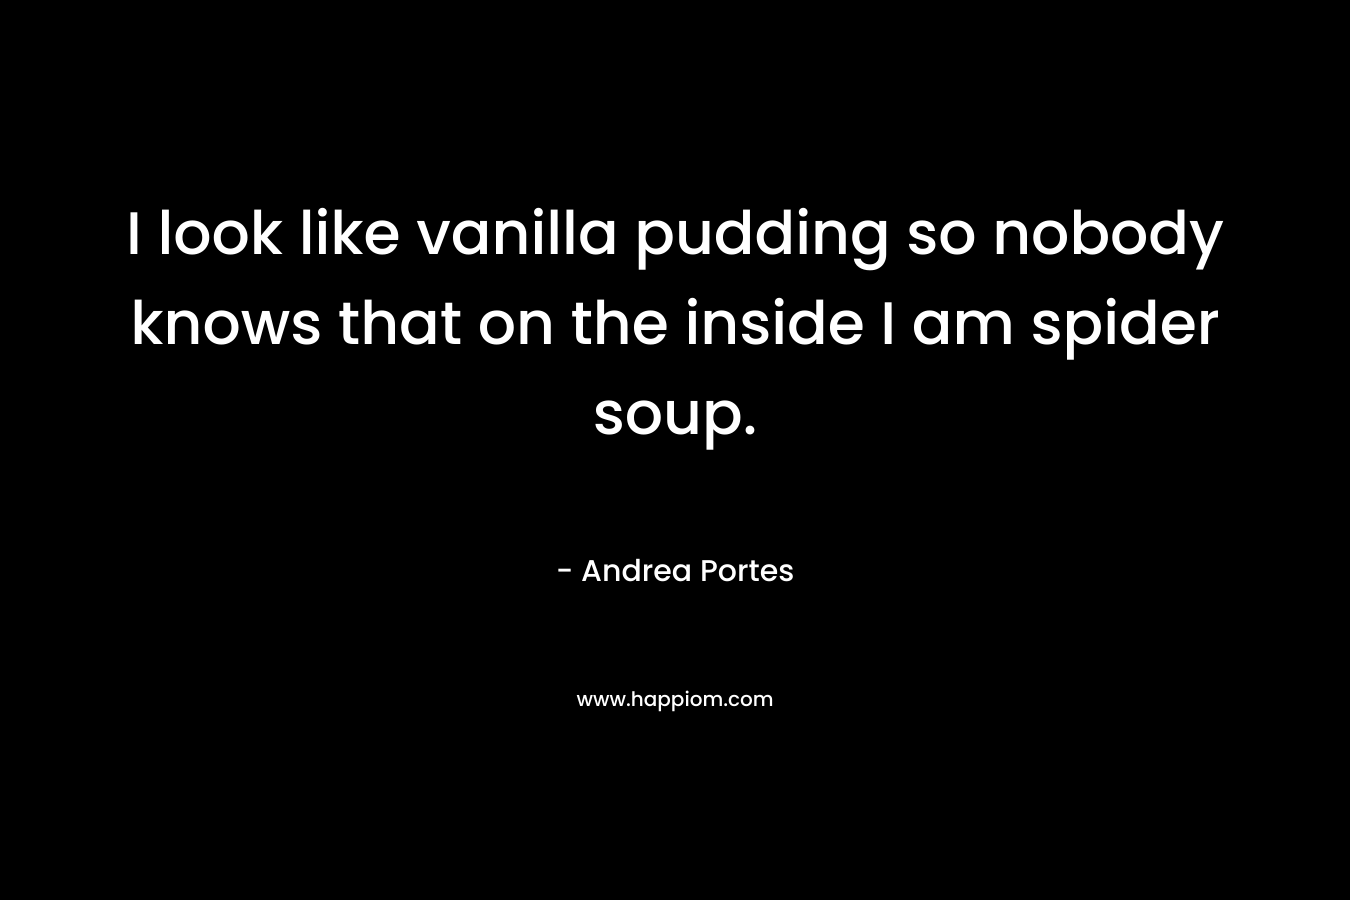 I look like vanilla pudding so nobody knows that on the inside I am spider soup.